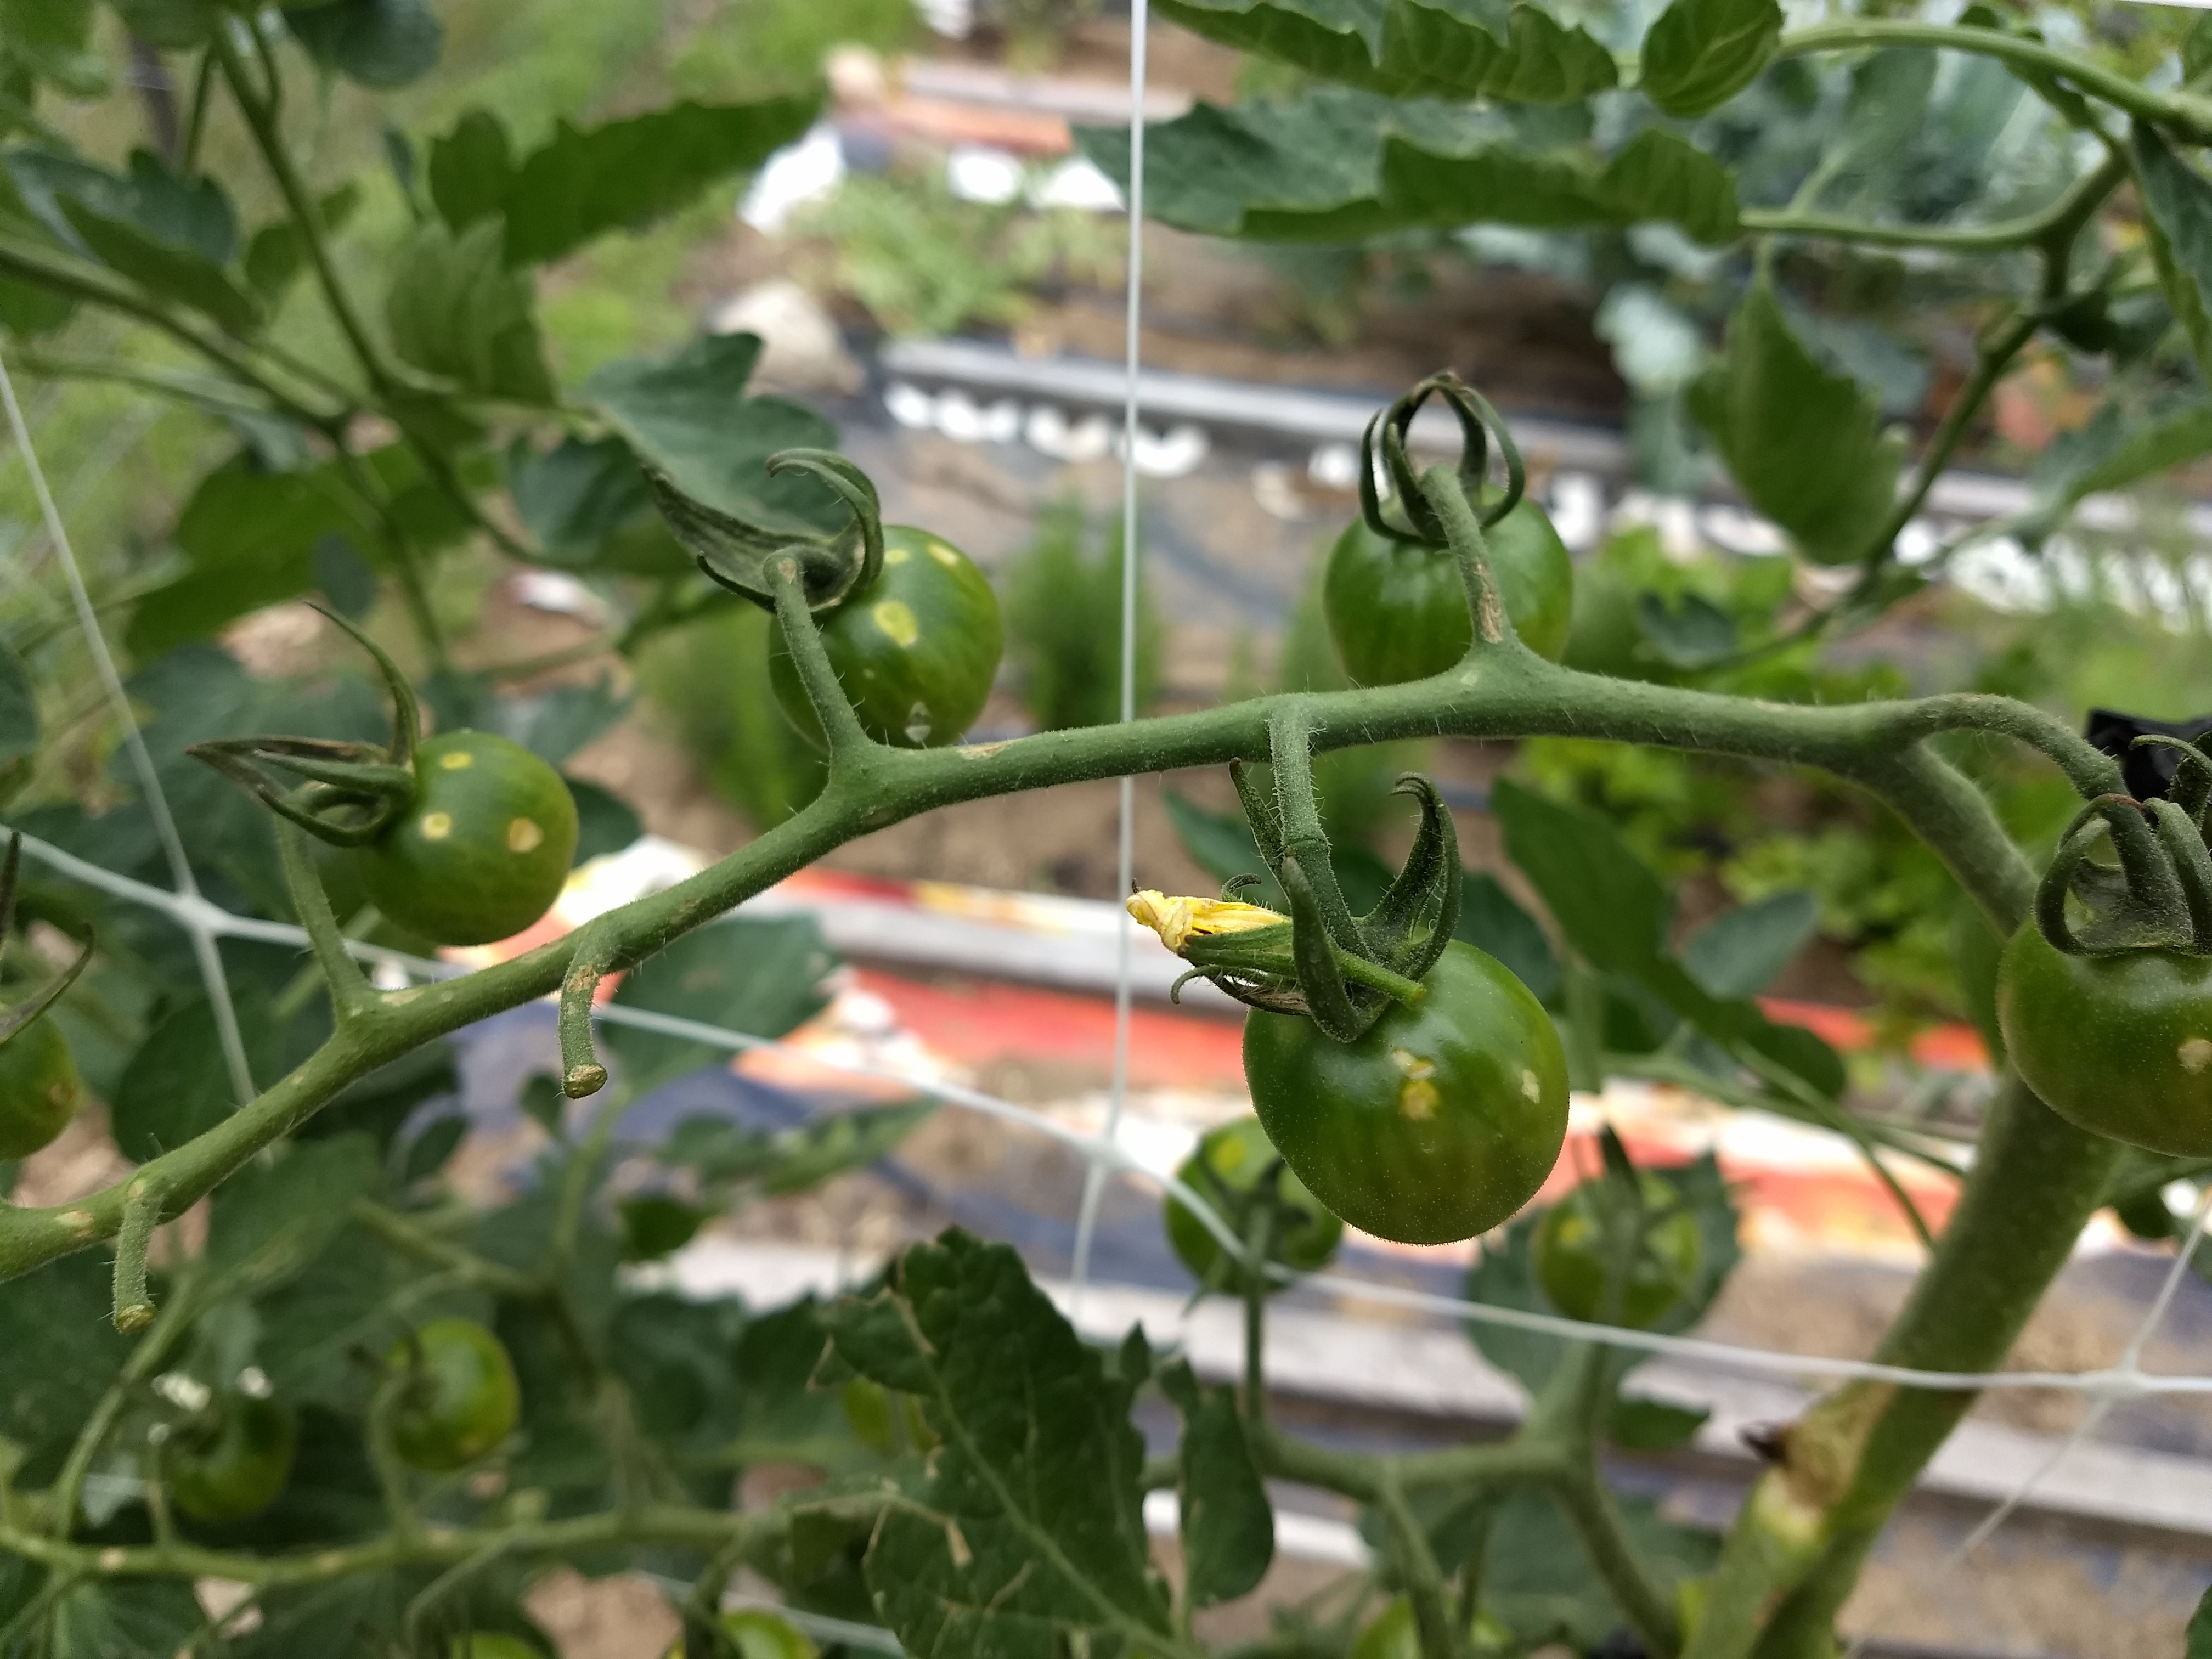 Rain damage in the form of yellow spots on tomato plants.